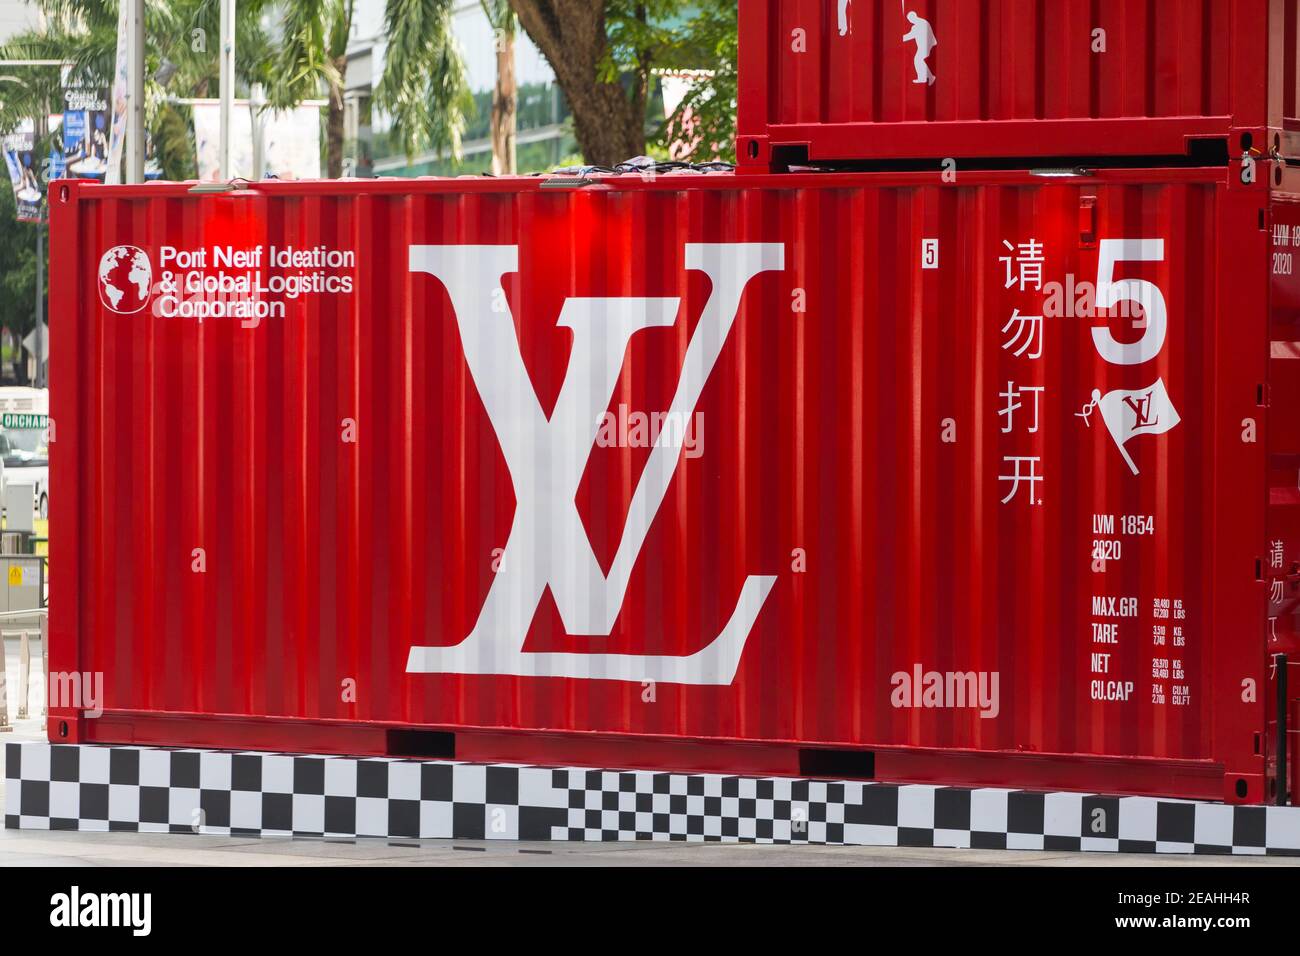 louis vuitton containers